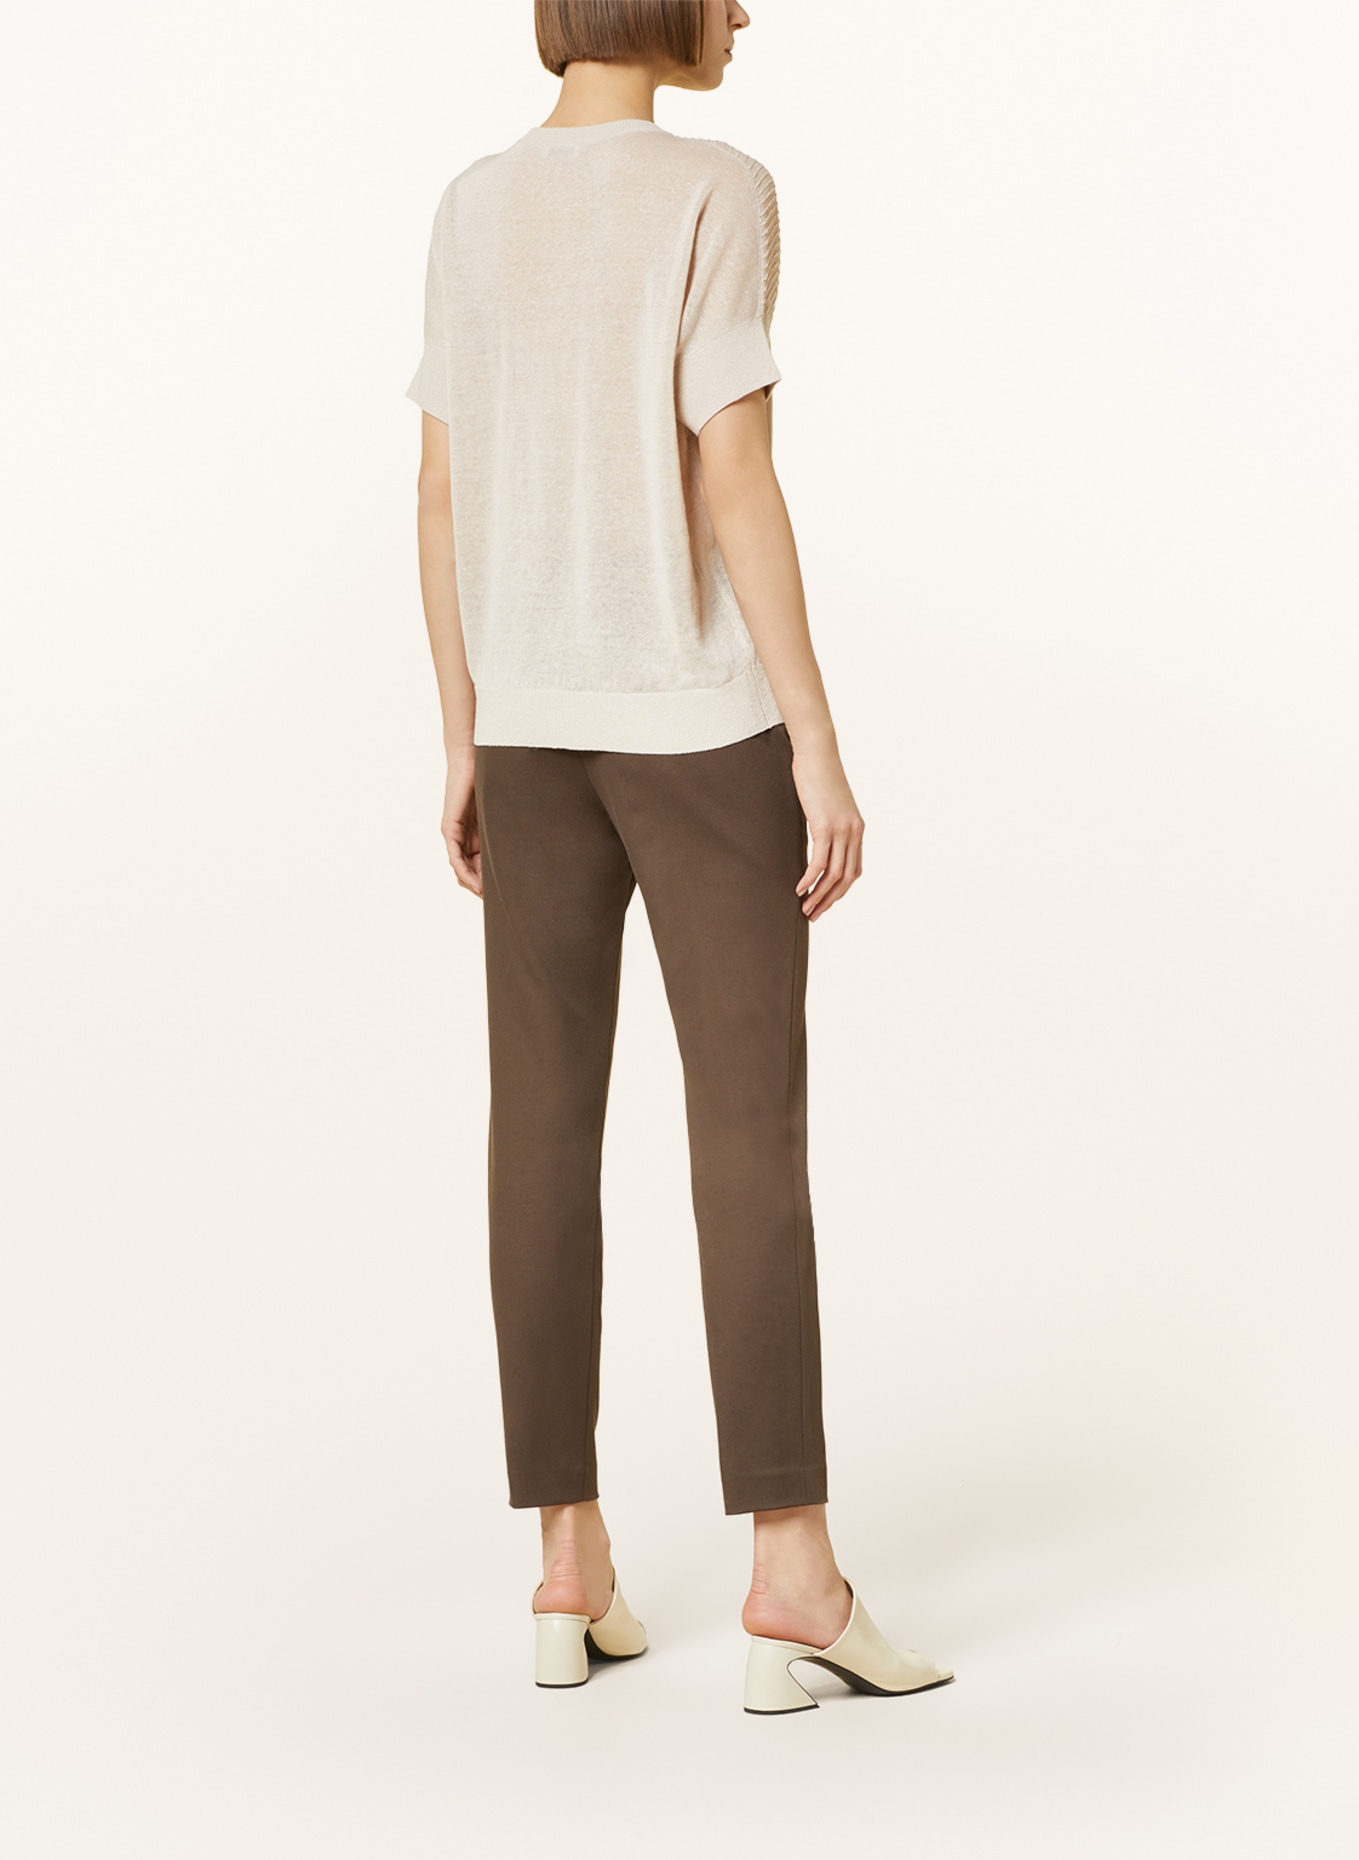 BRUNELLO CUCINELLI Knit shirt made of linen with sequins, Color: CREAM (Image 3)